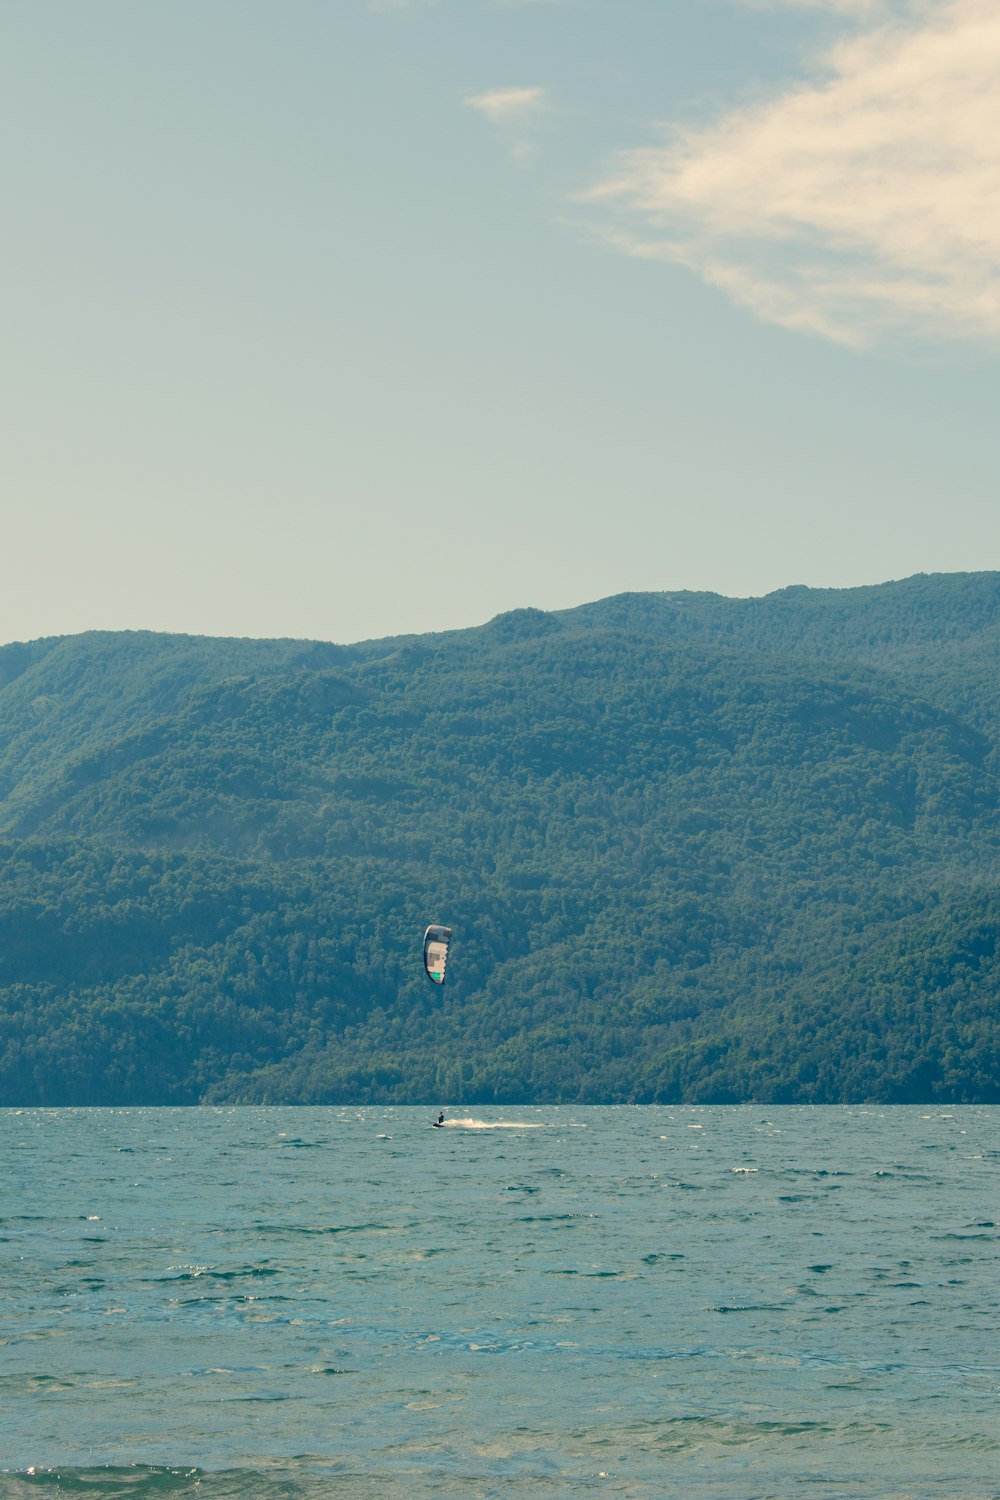 a parasailer glides across the water in front of a mountain range